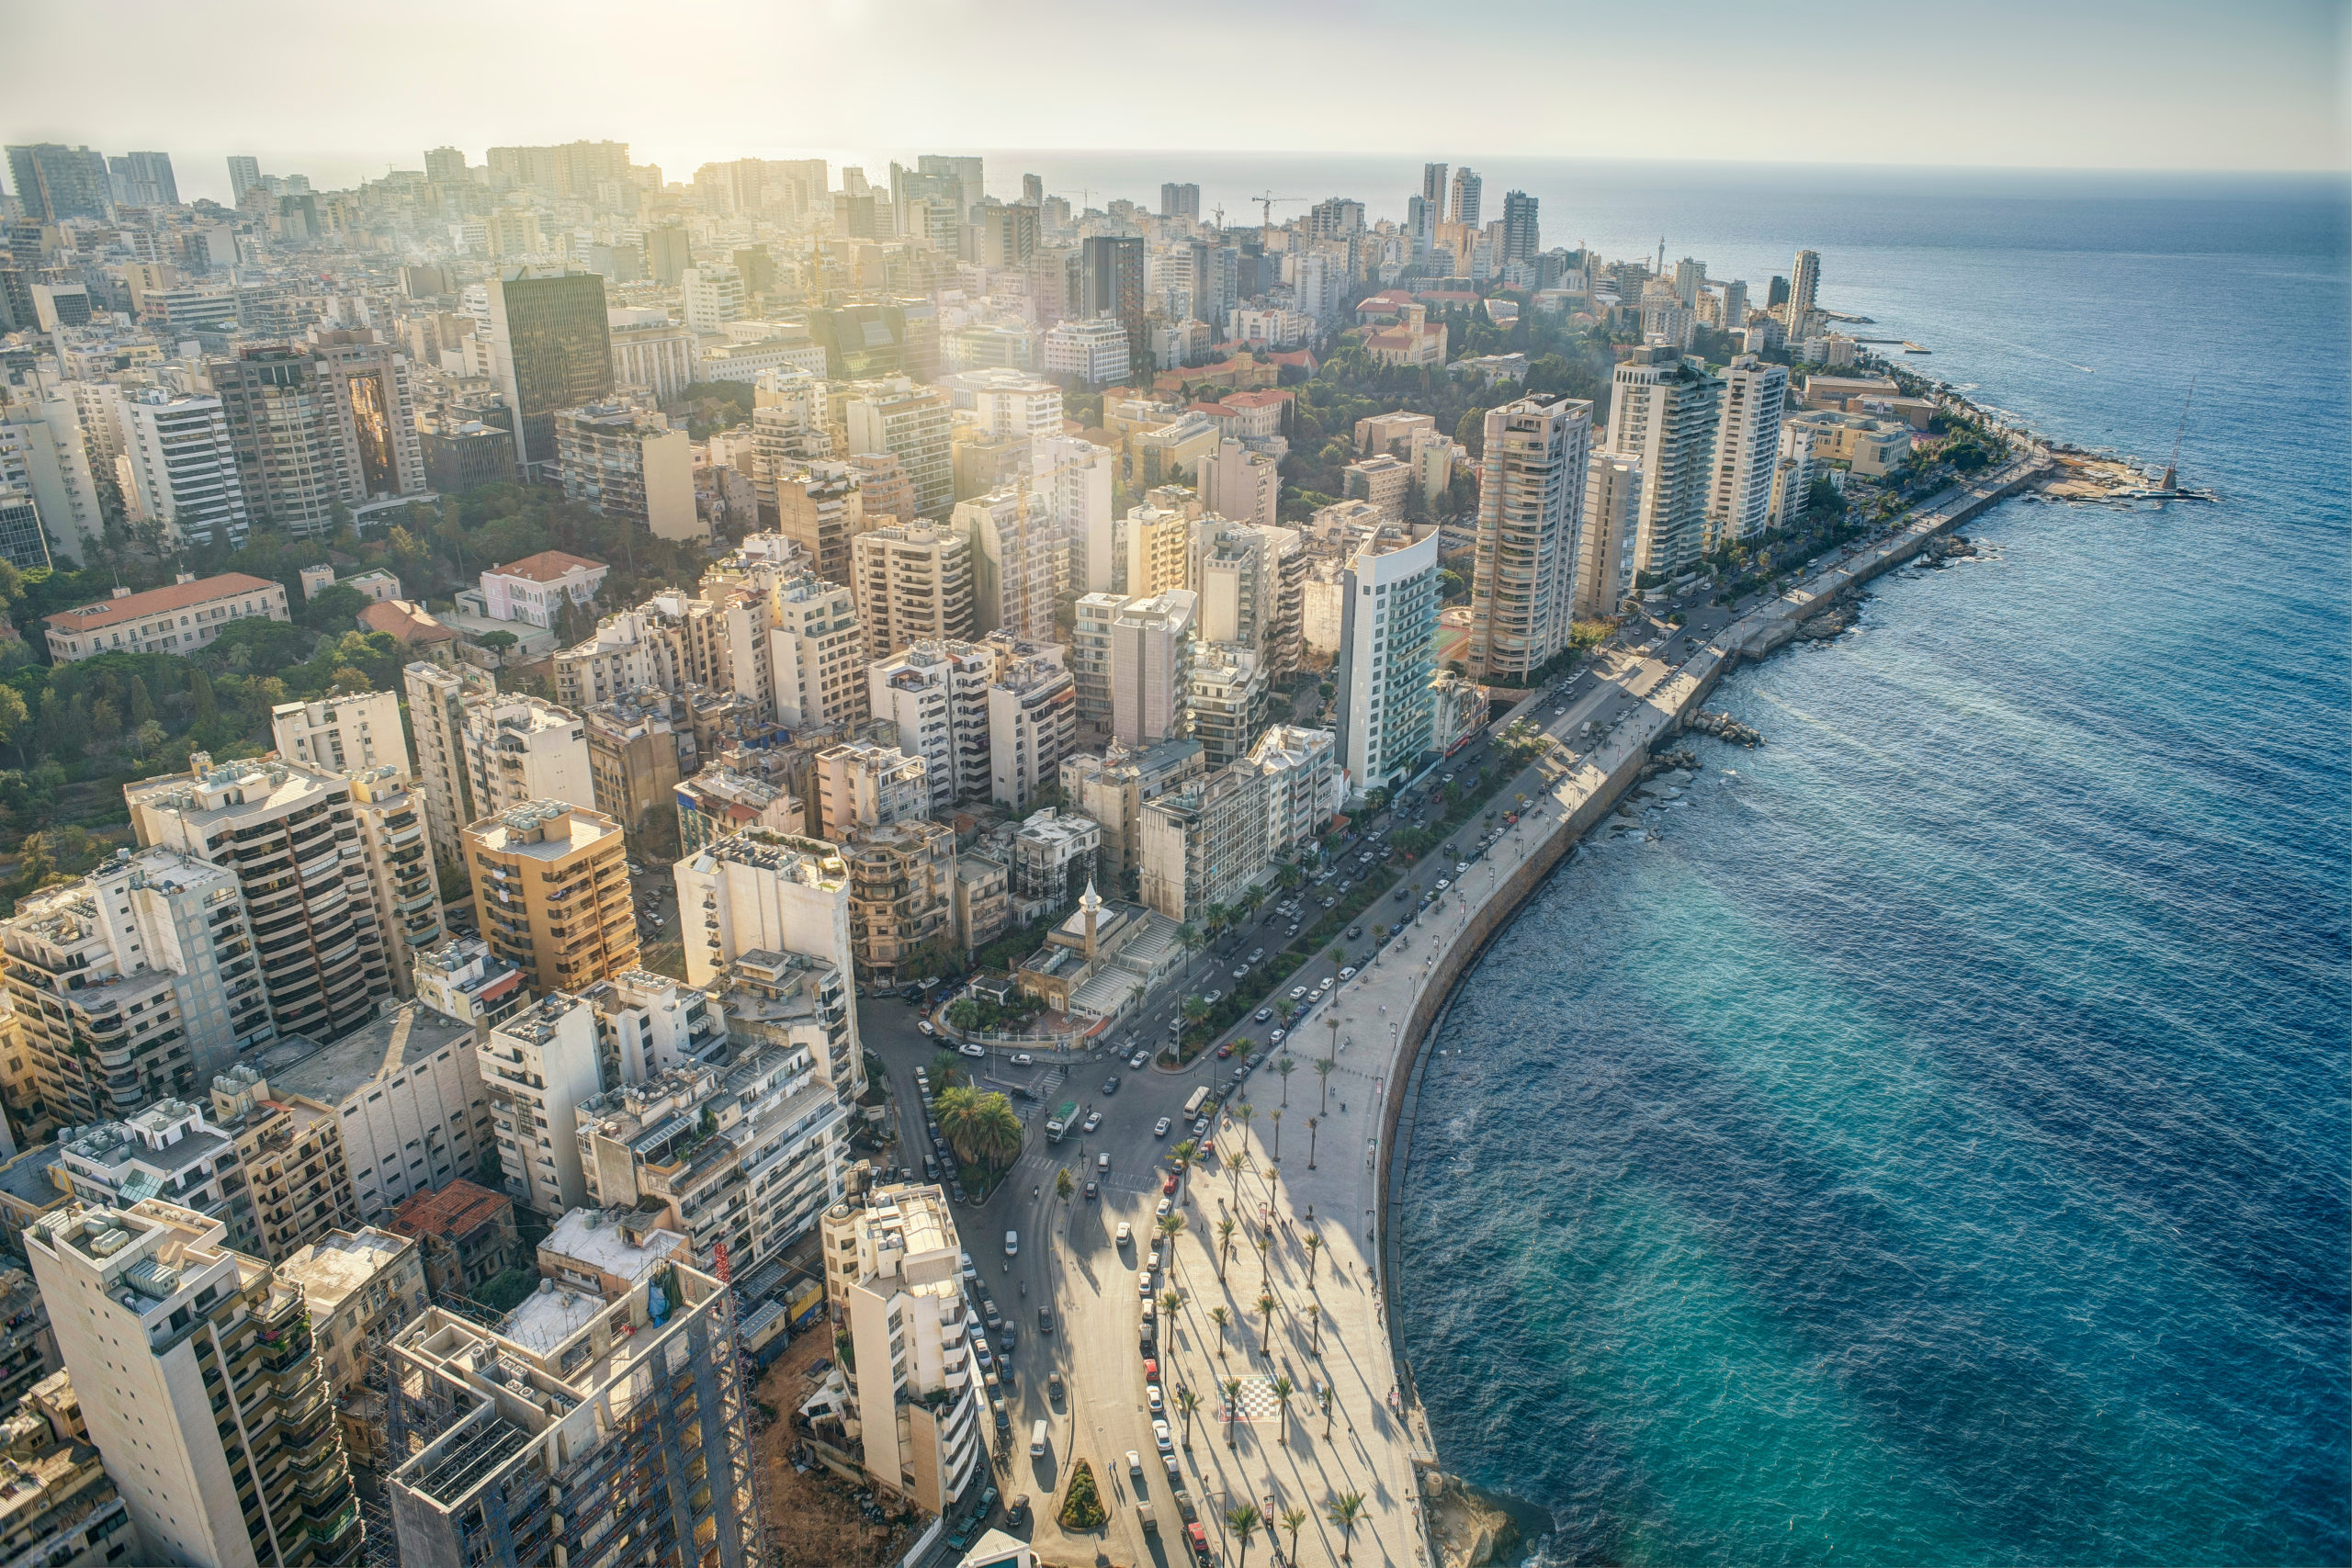 Aerial View of Beirut Lebanon, City of Beirut, Beirut city scape